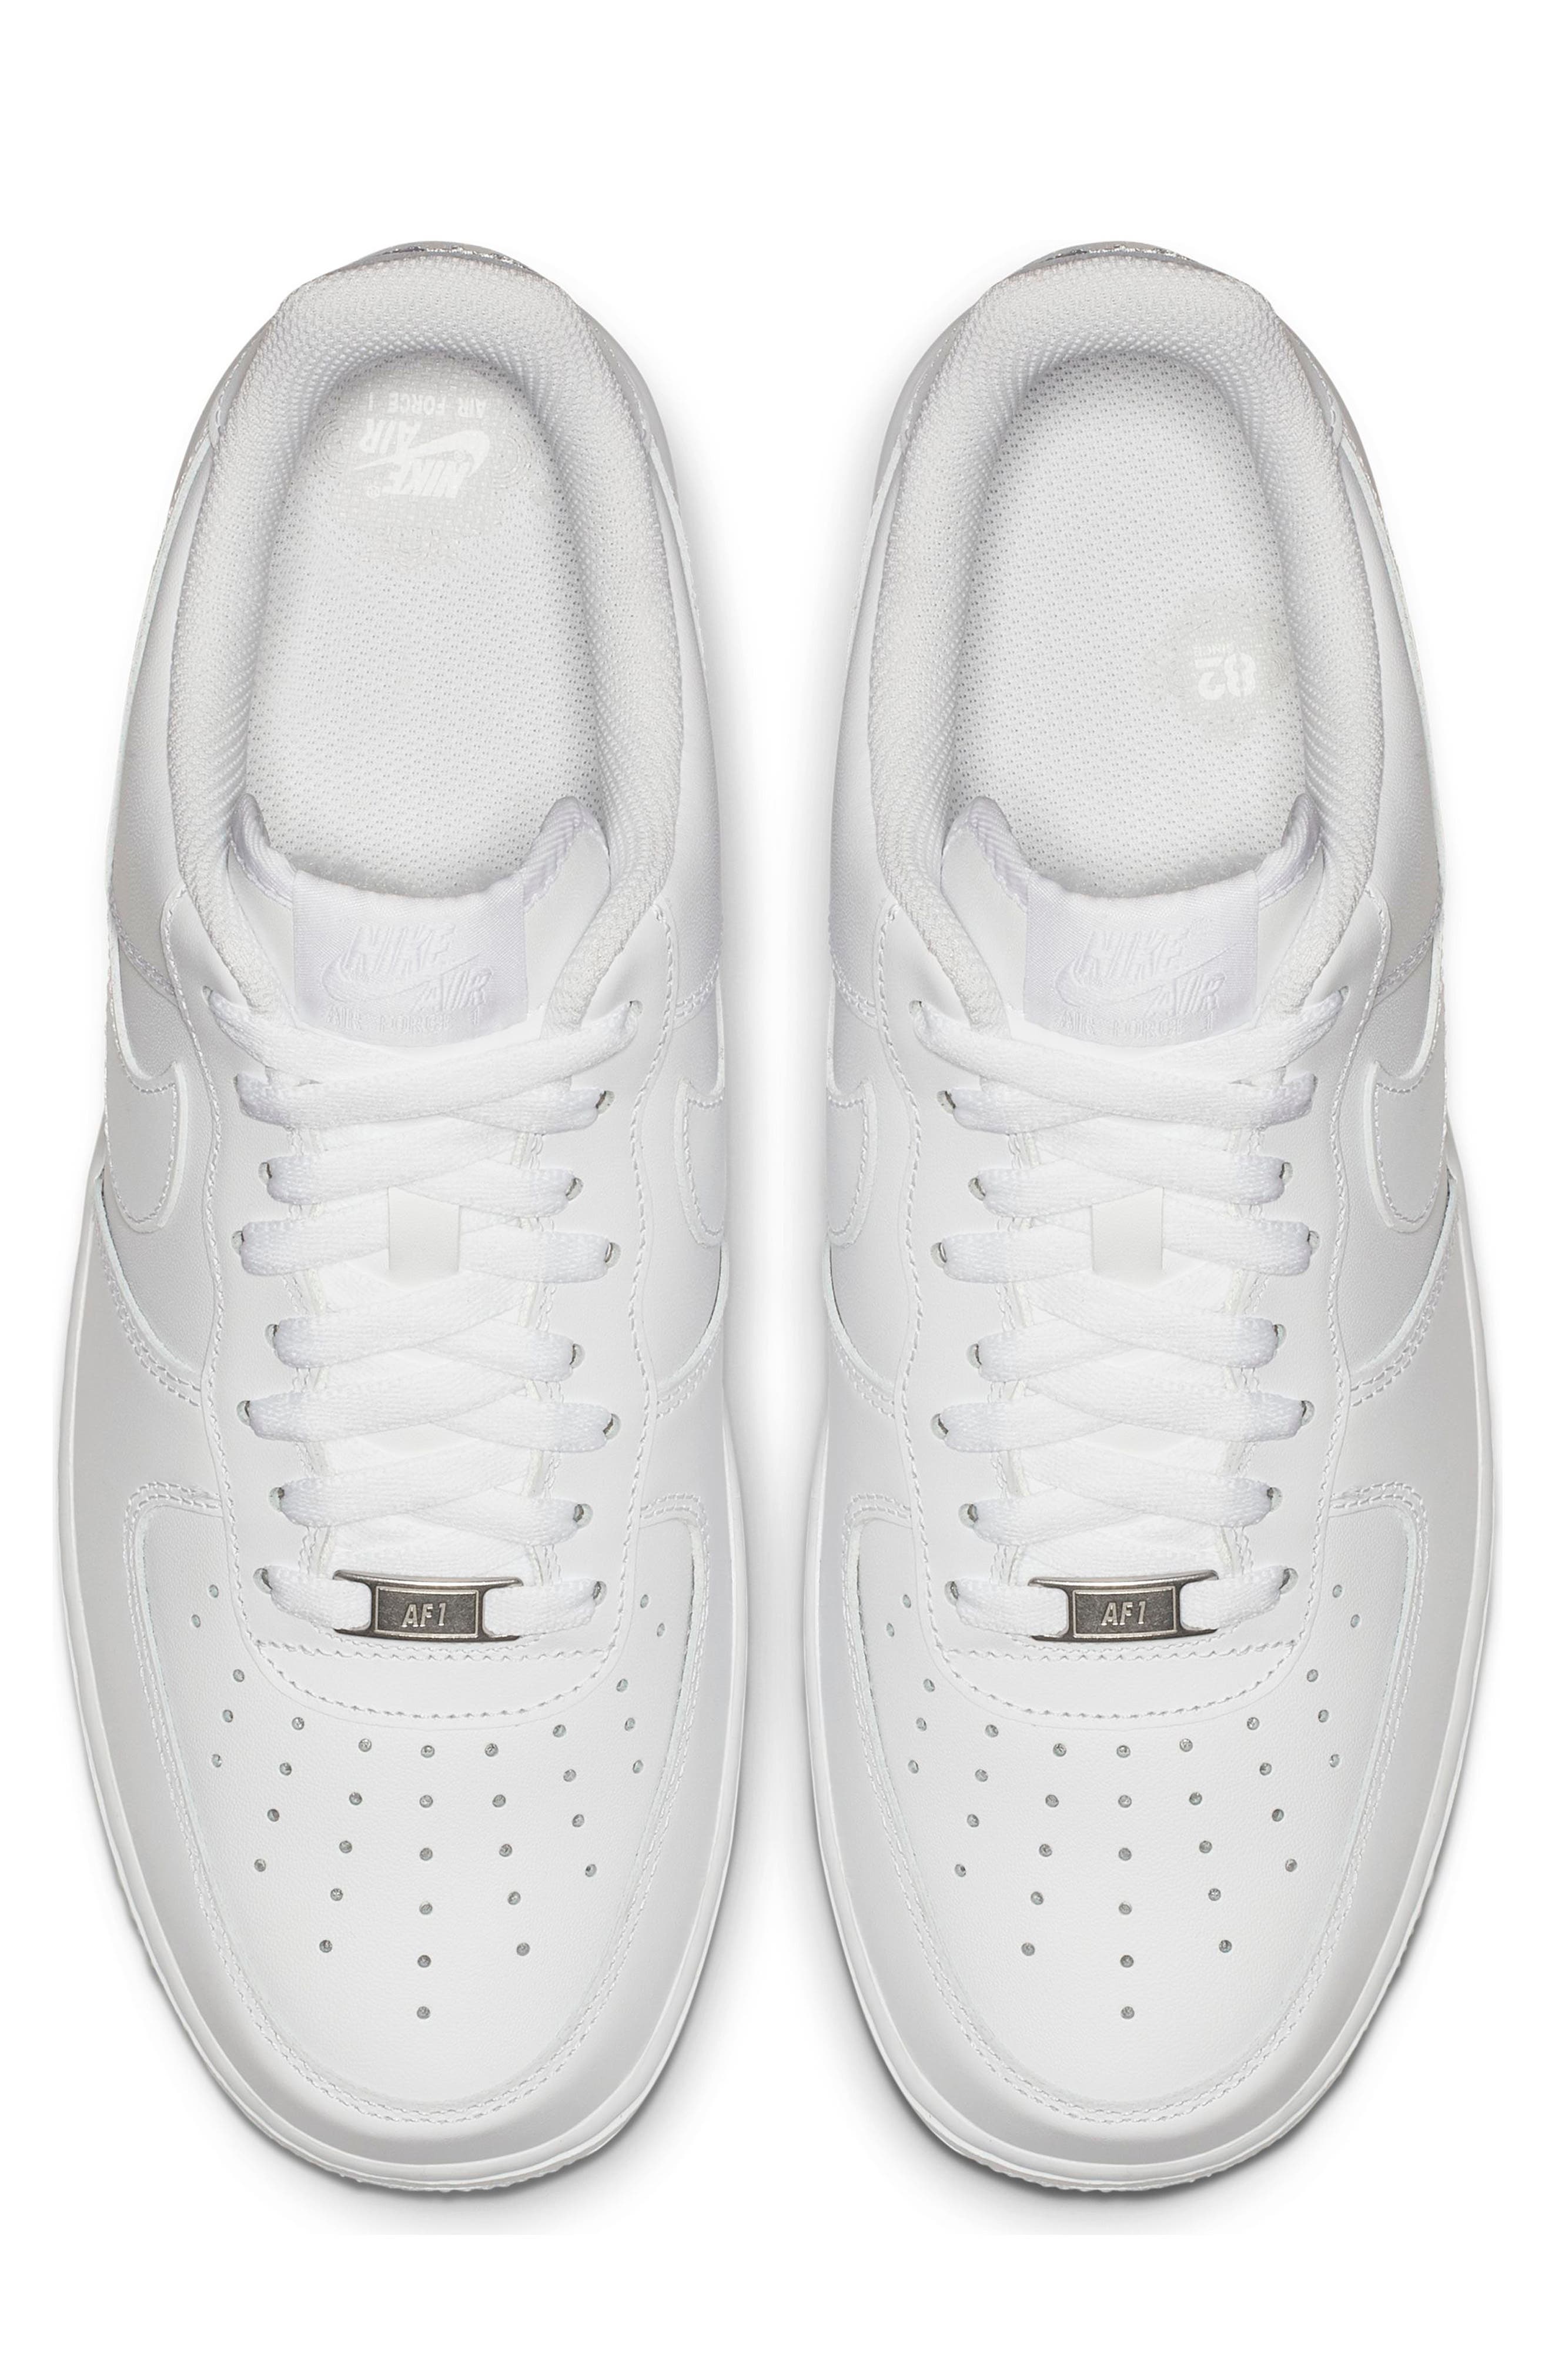 white air force 1s size 7